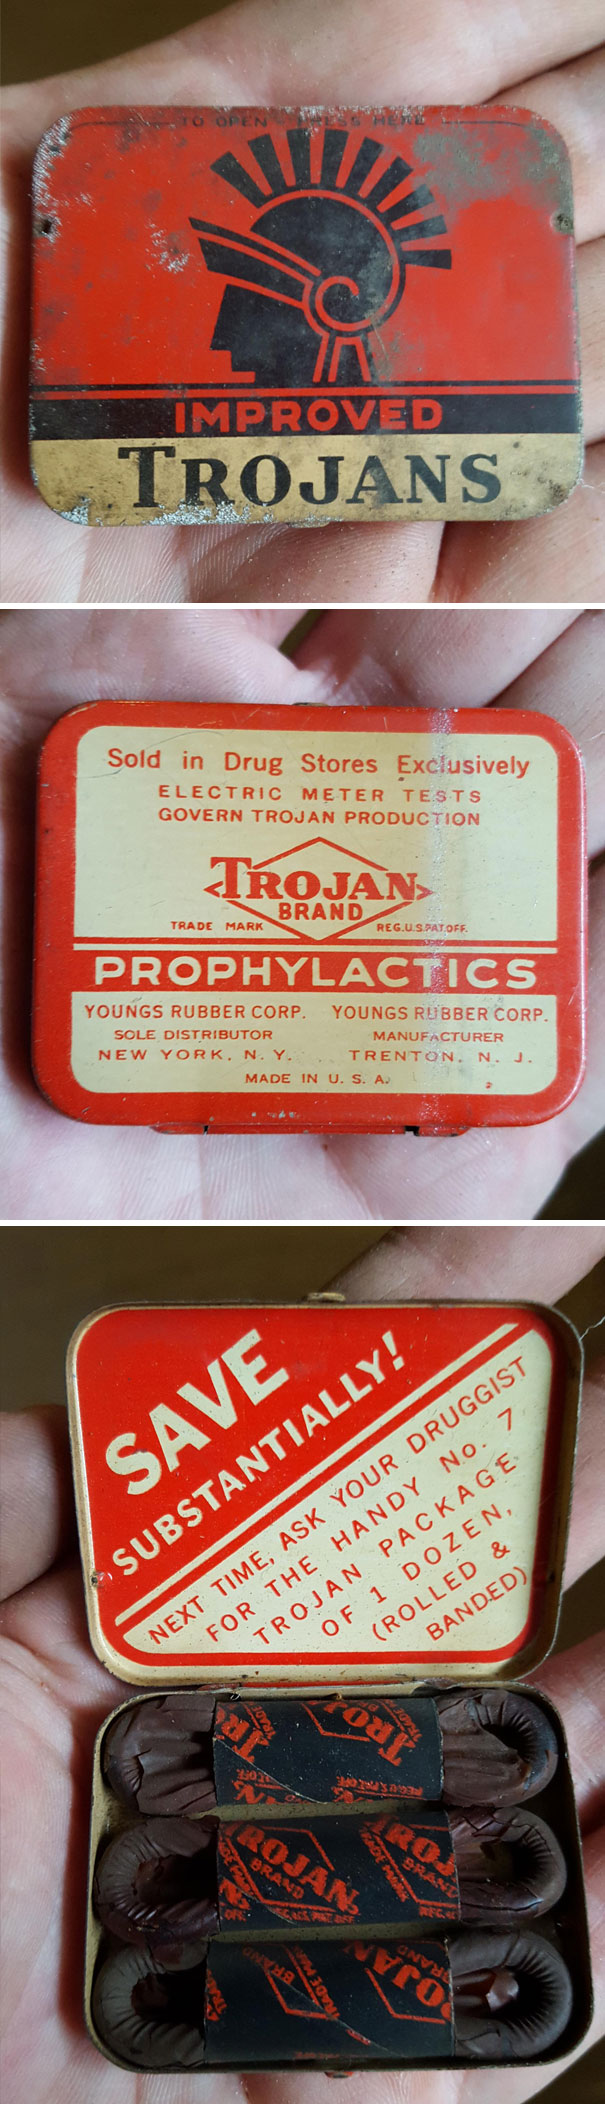 These Condoms Are Around 60 Years Old (Found In My Basement)